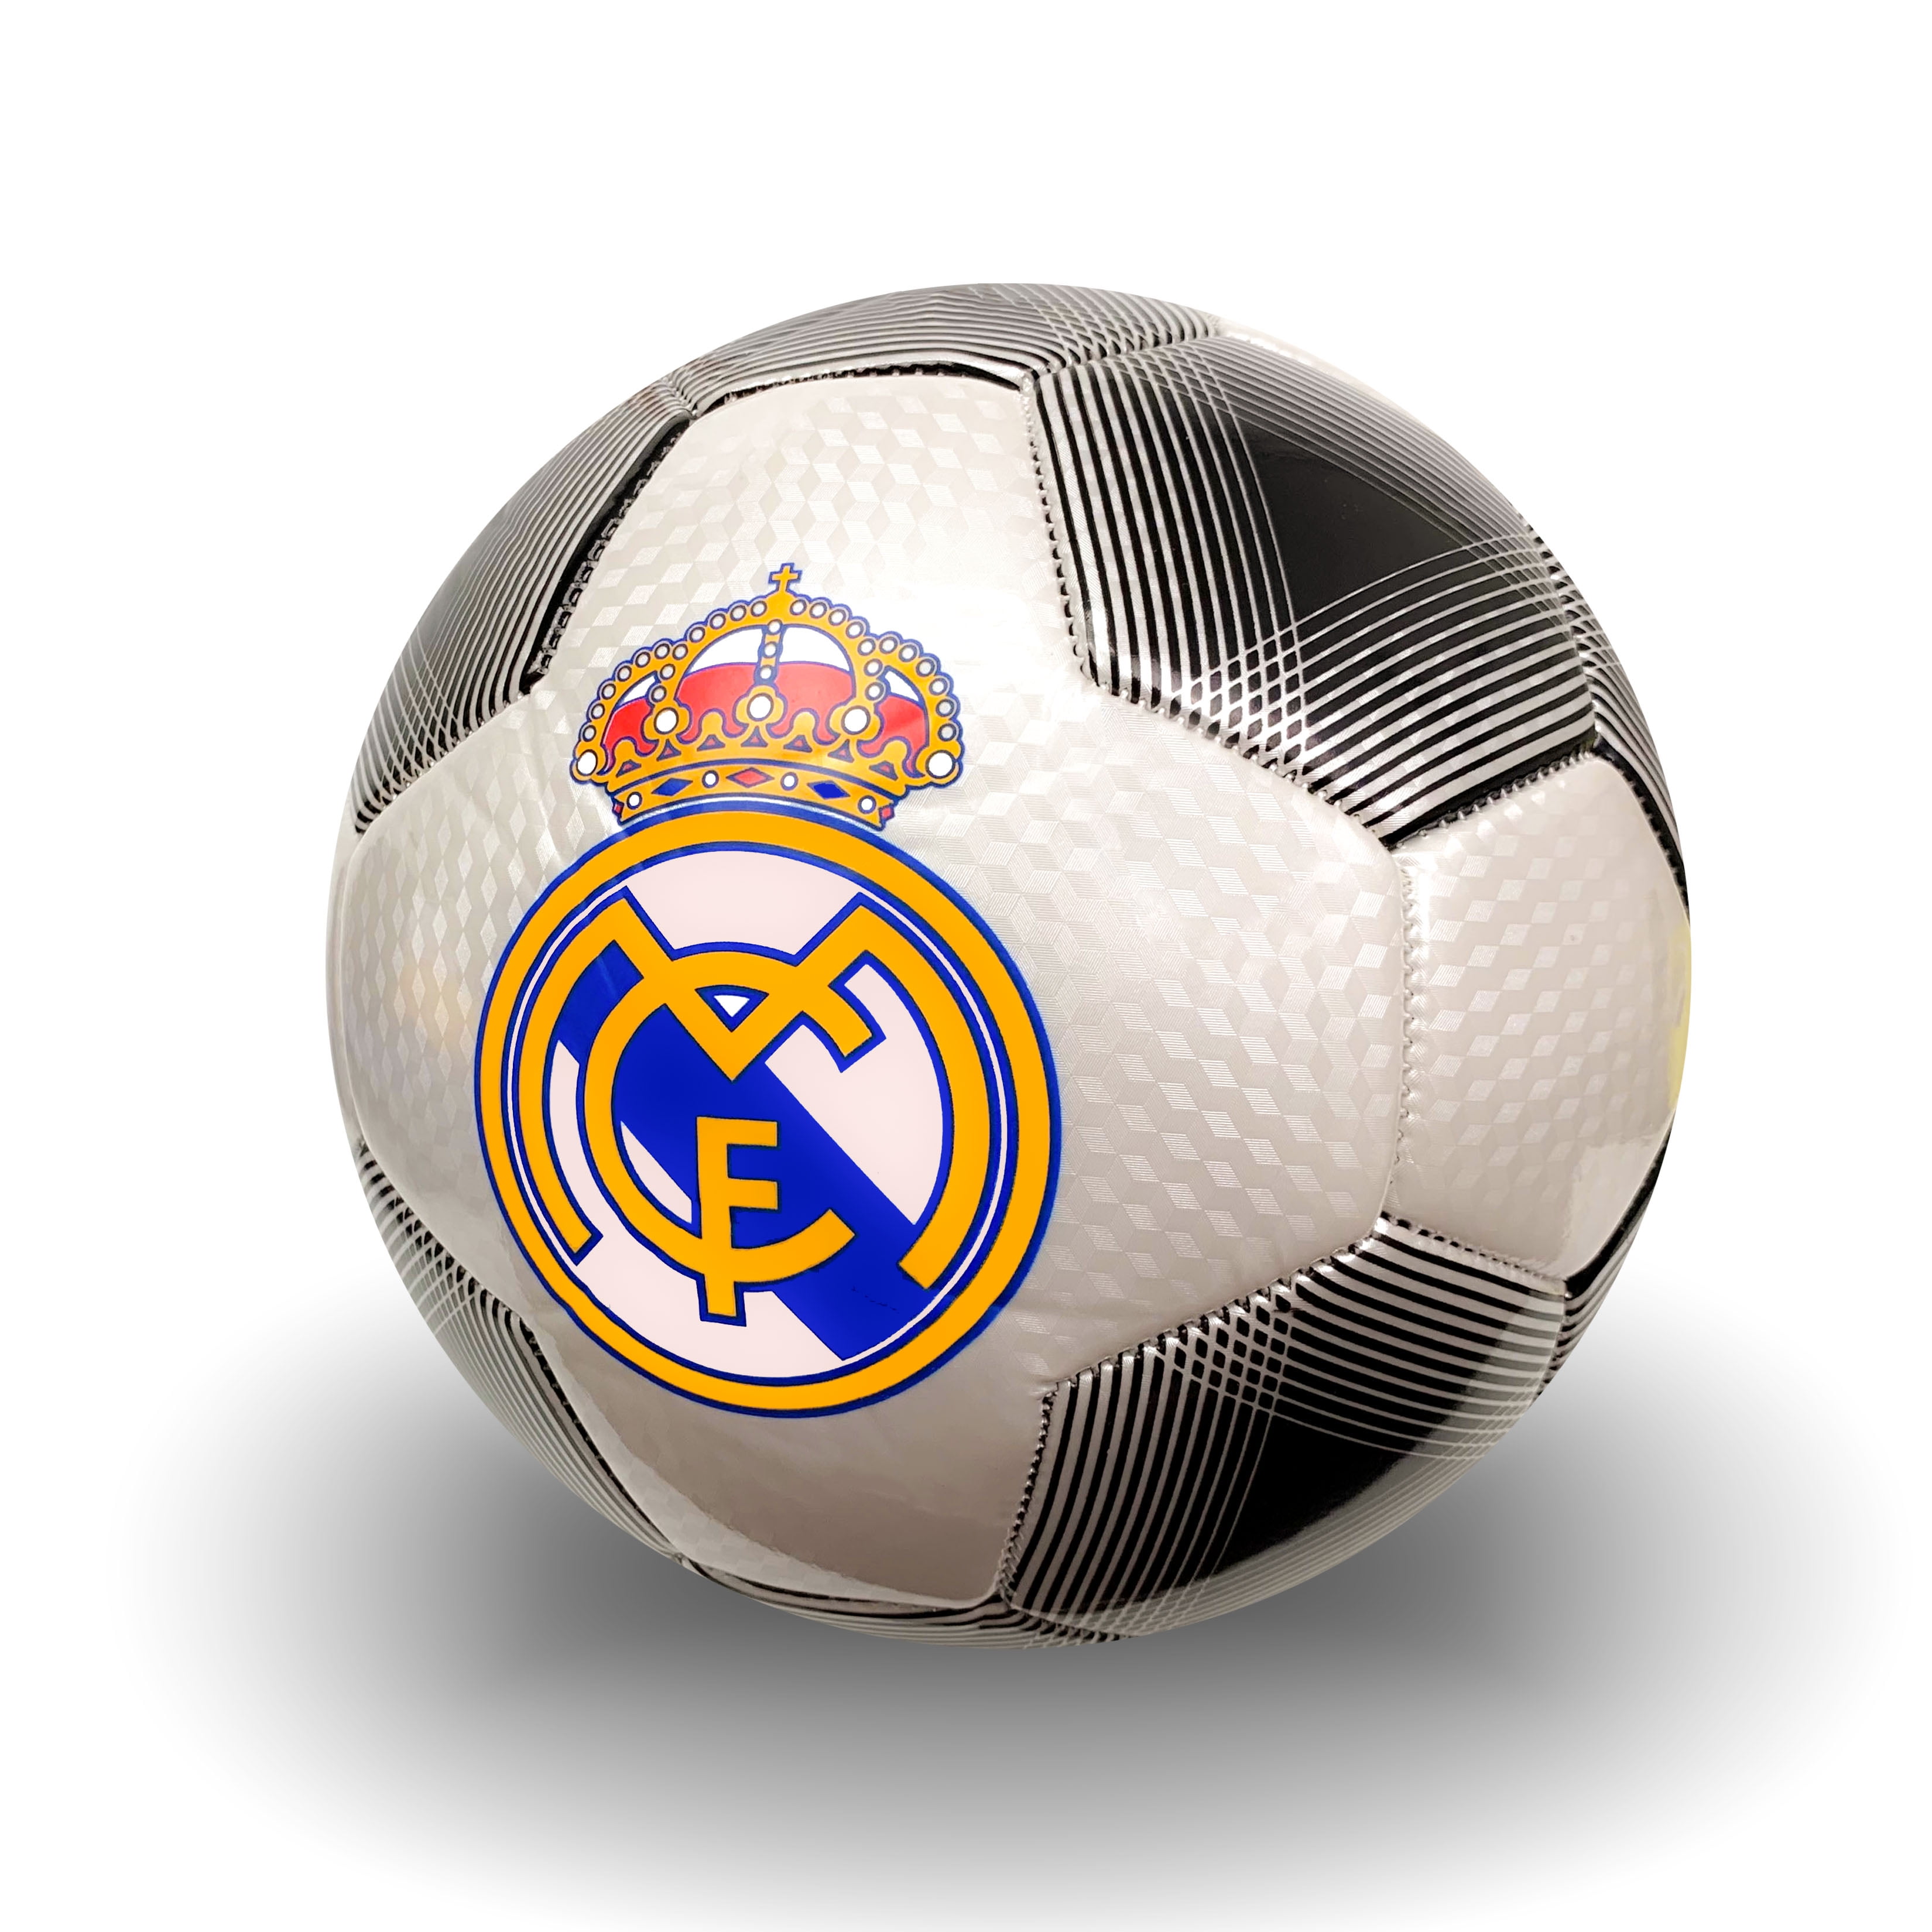 Real Madrid Authentic Official Licensed Soccer Ball Size 4-002 by RHINOXGROUP 